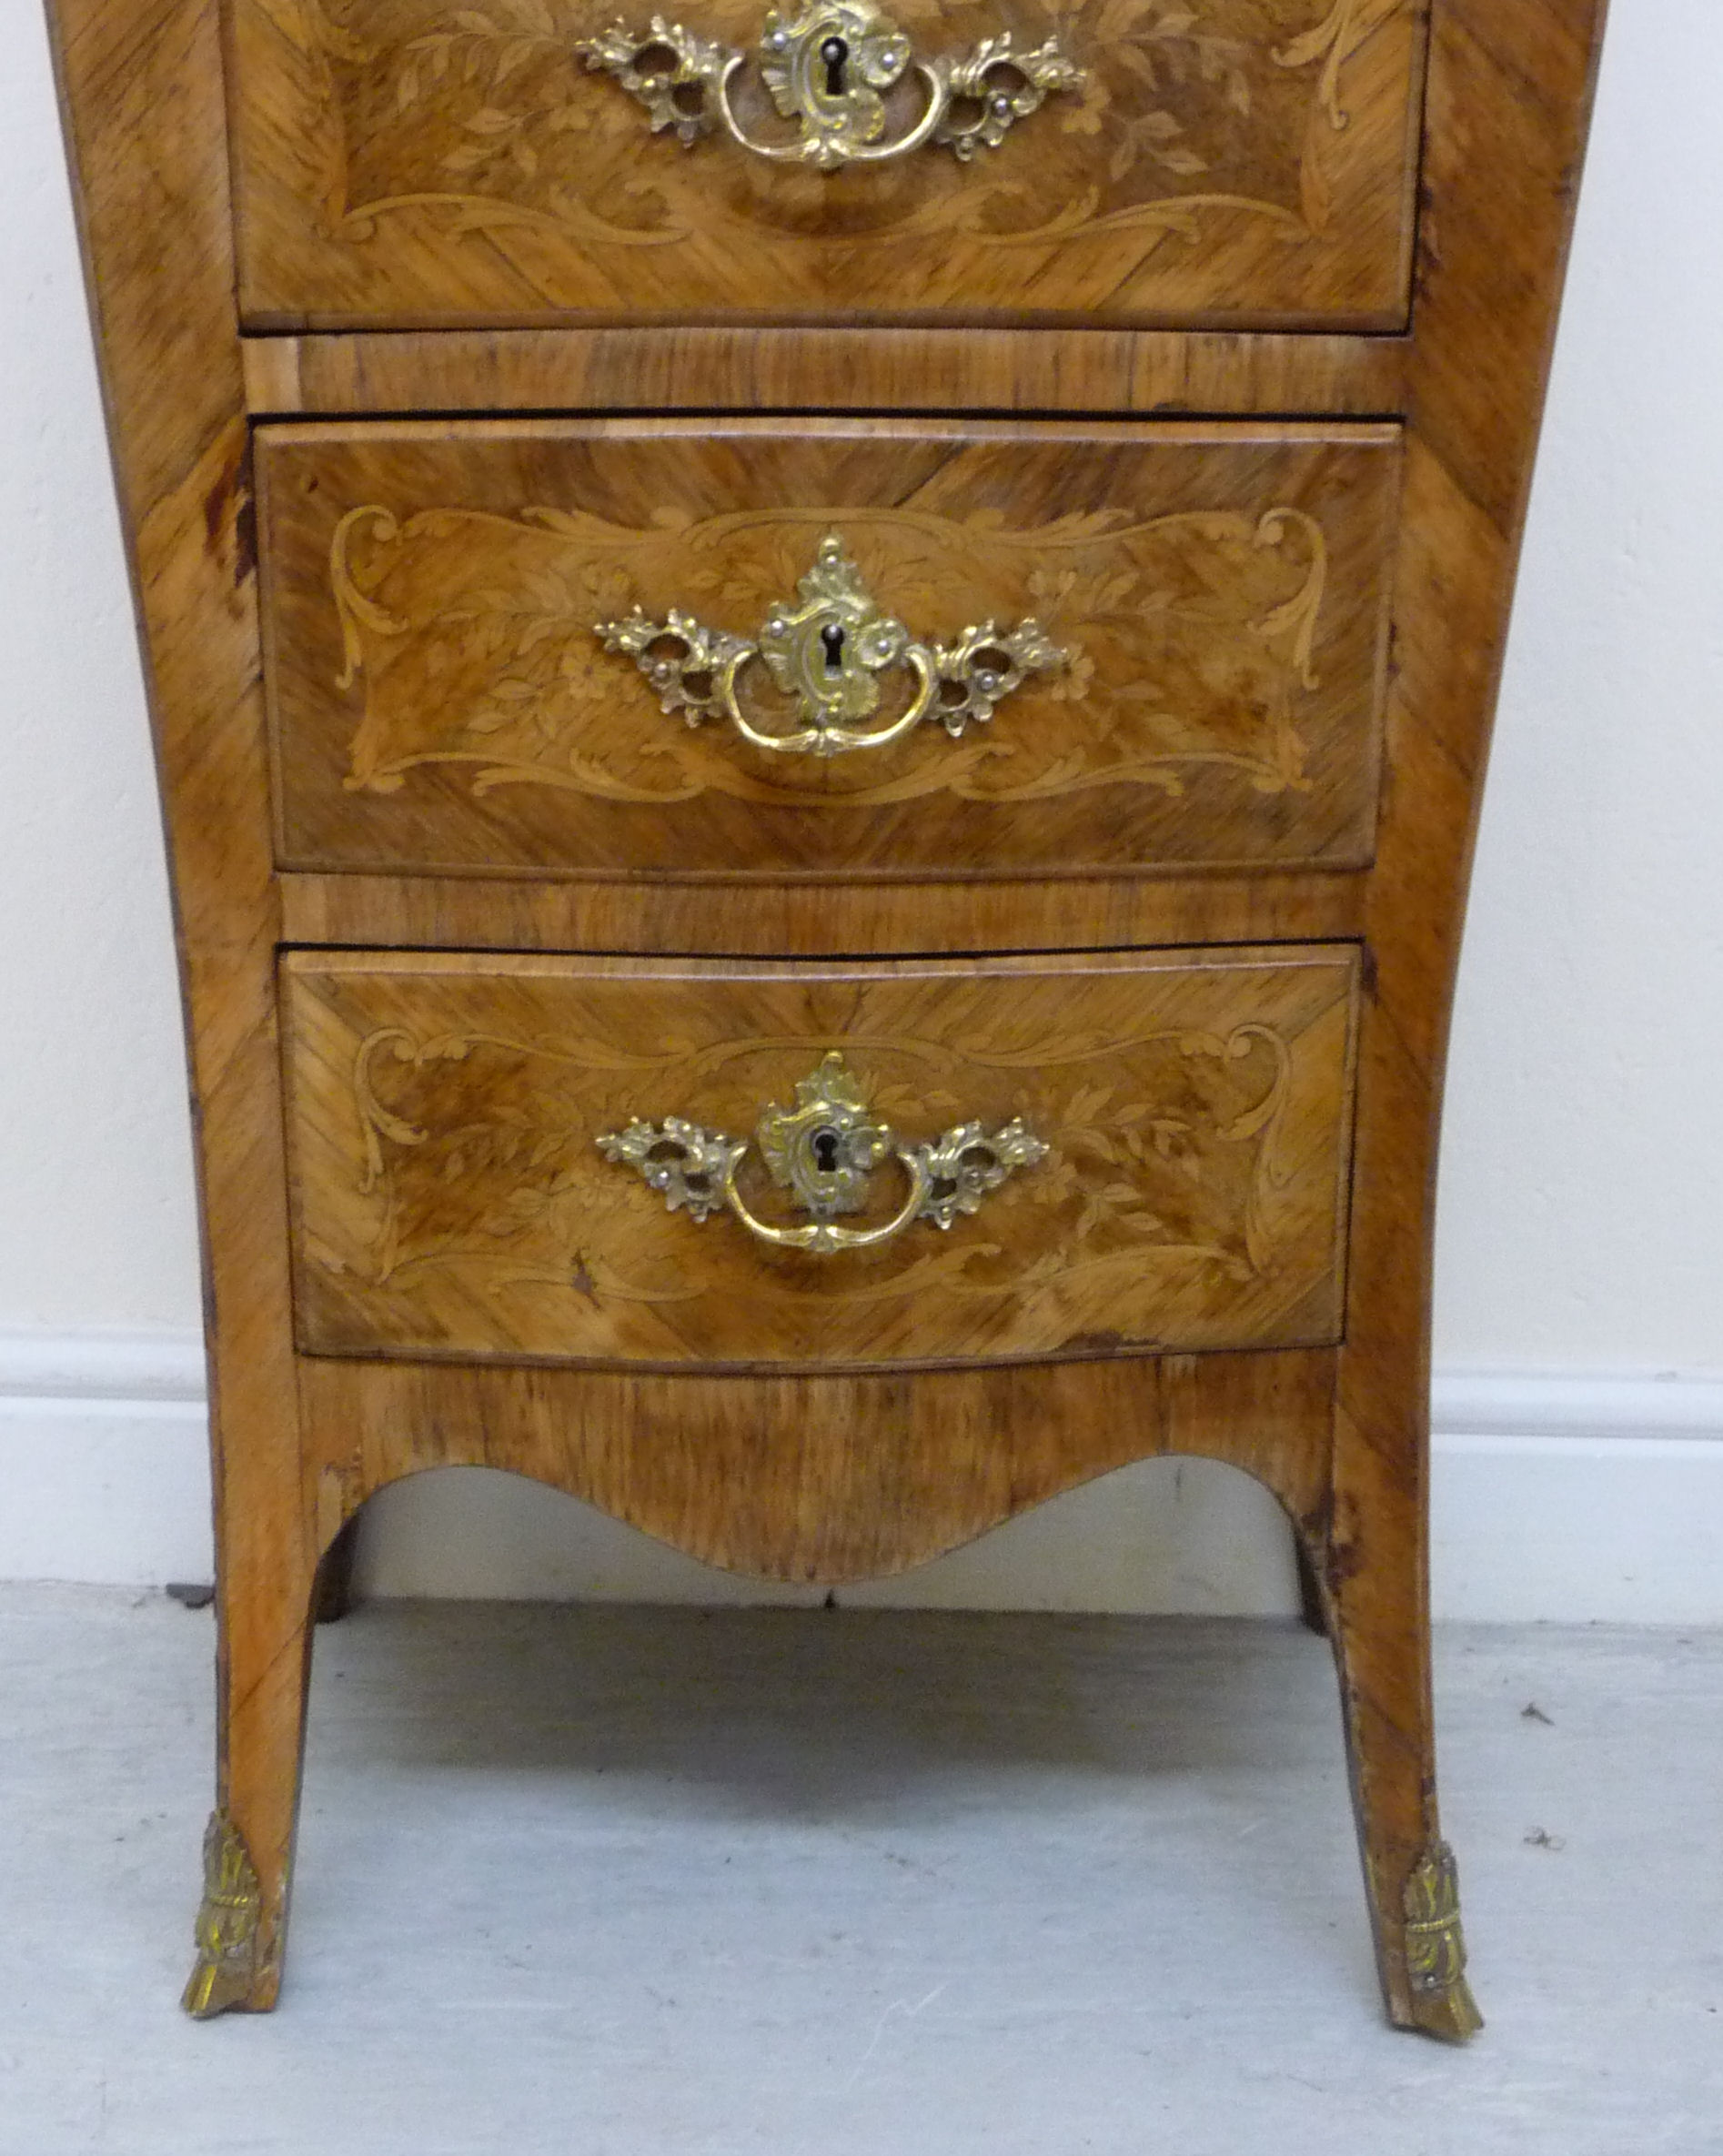 An early 20thC Louis XV inspired satinwood inlaid Kingwood veneered pedestal chest with a - Image 2 of 9